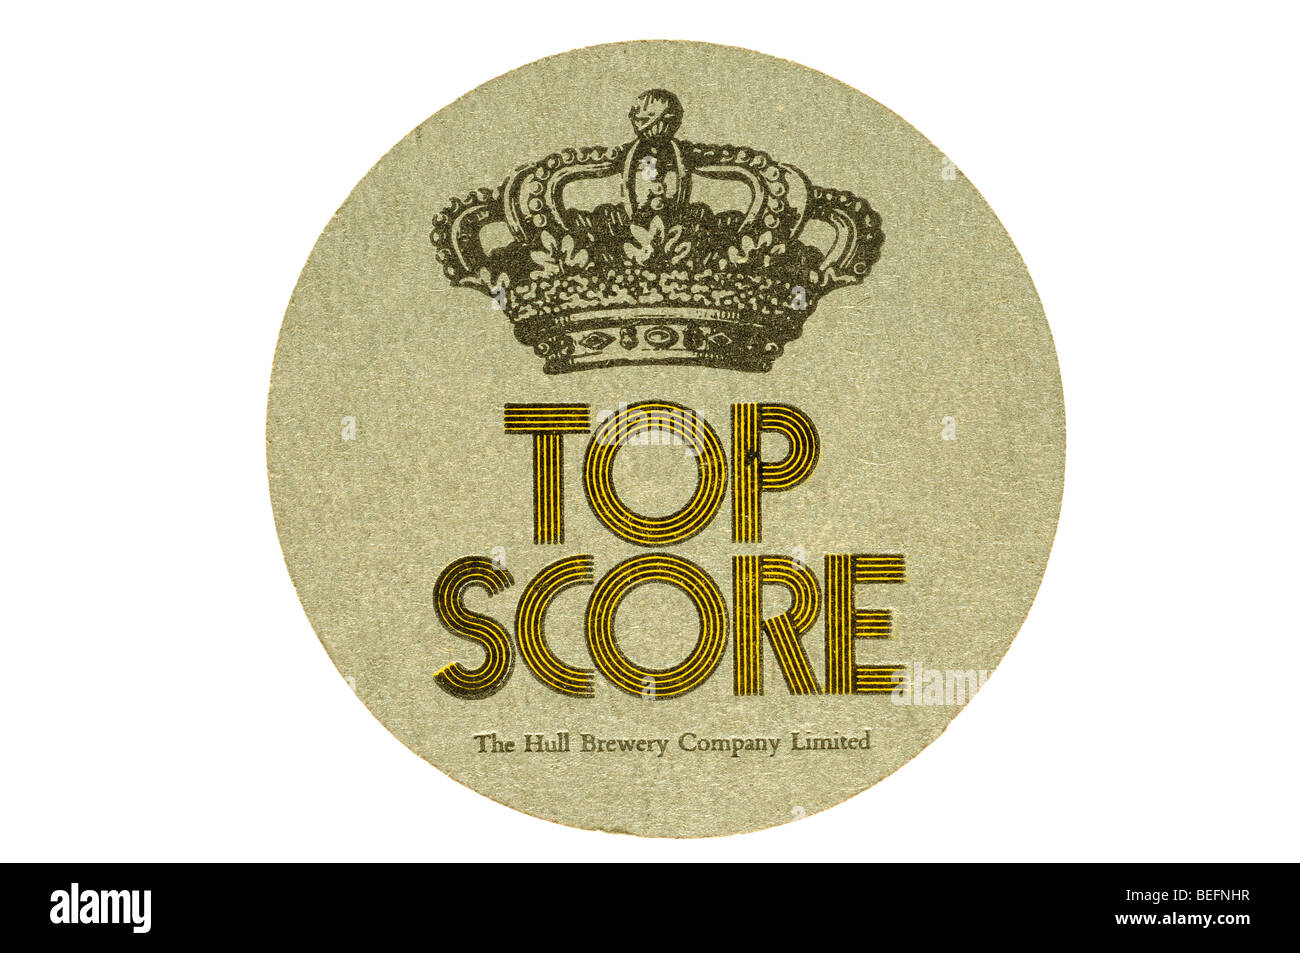 top score the hull brewery company limited Stock Photo